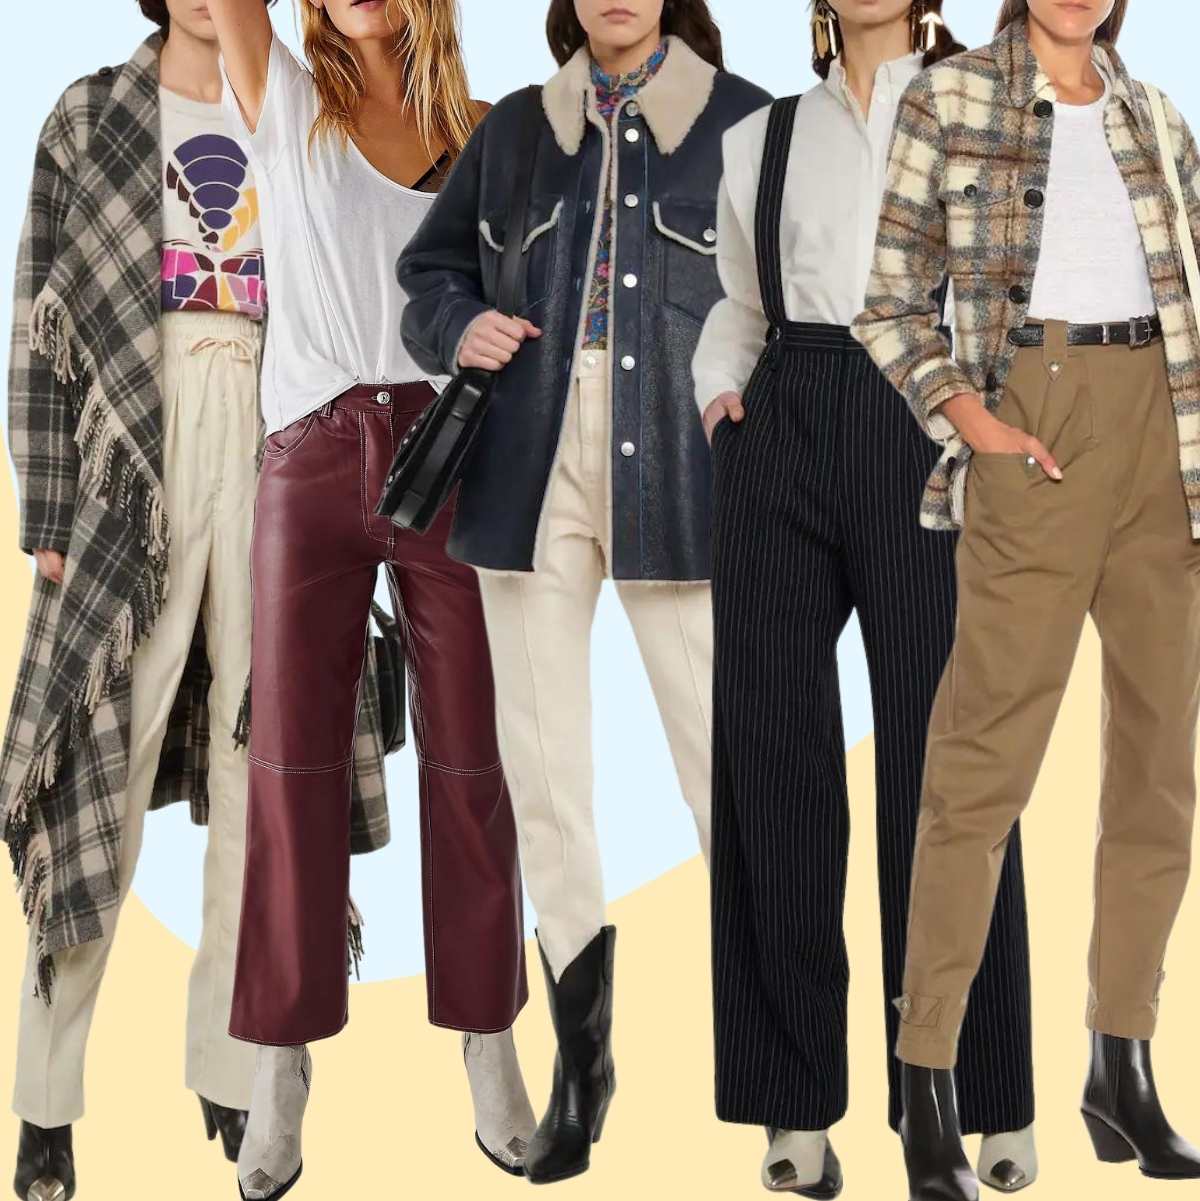 Collage of 5 women wearing different cowboy boots outfits with dress pants shorts.